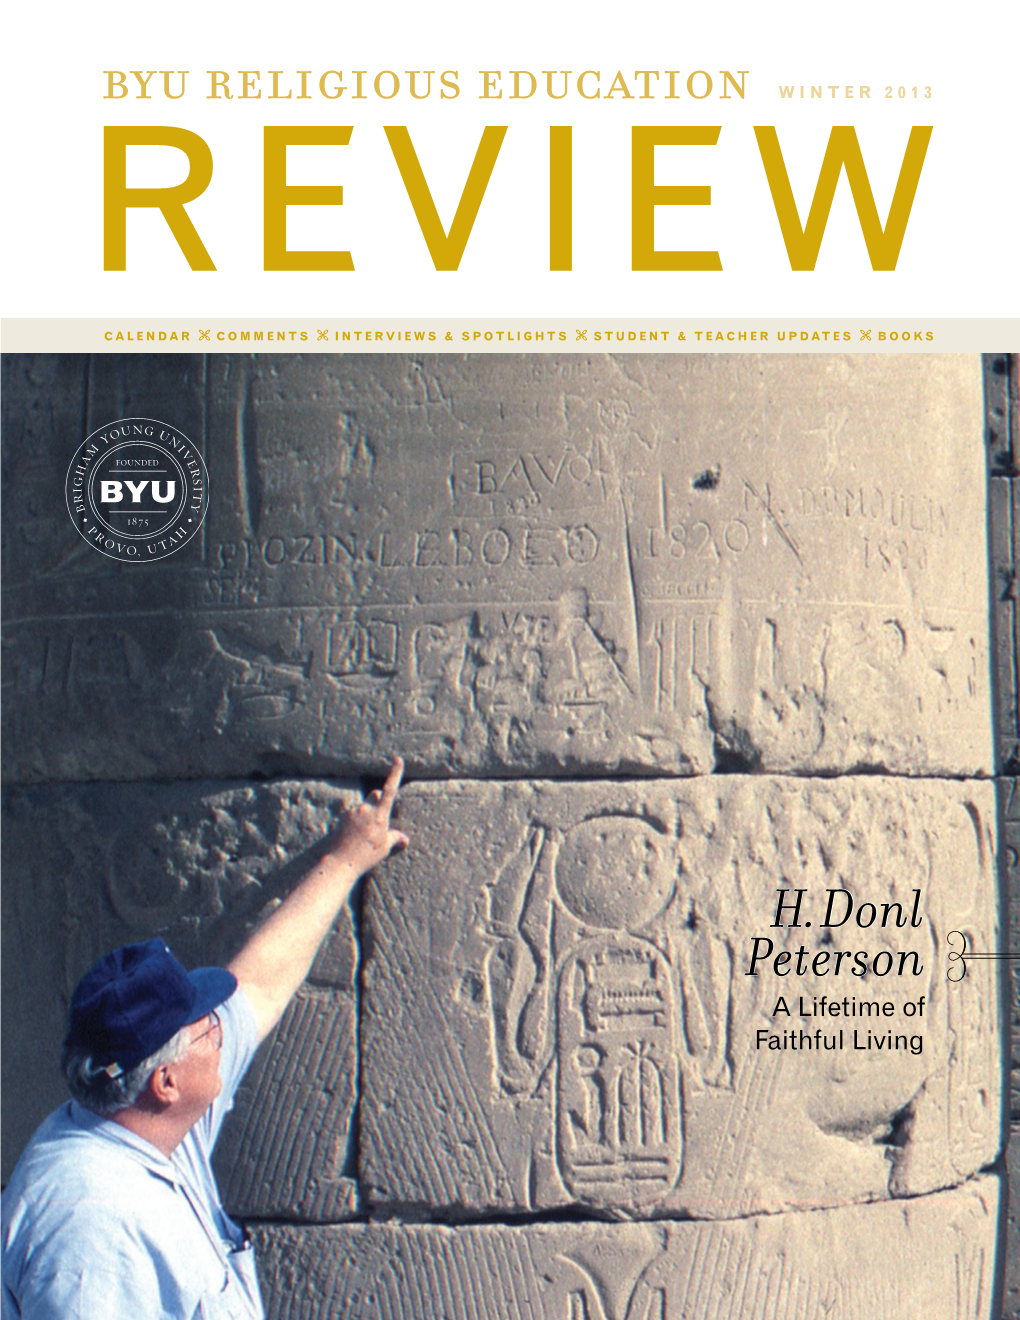 Byu Religious Education Winter 2013 REVIEW